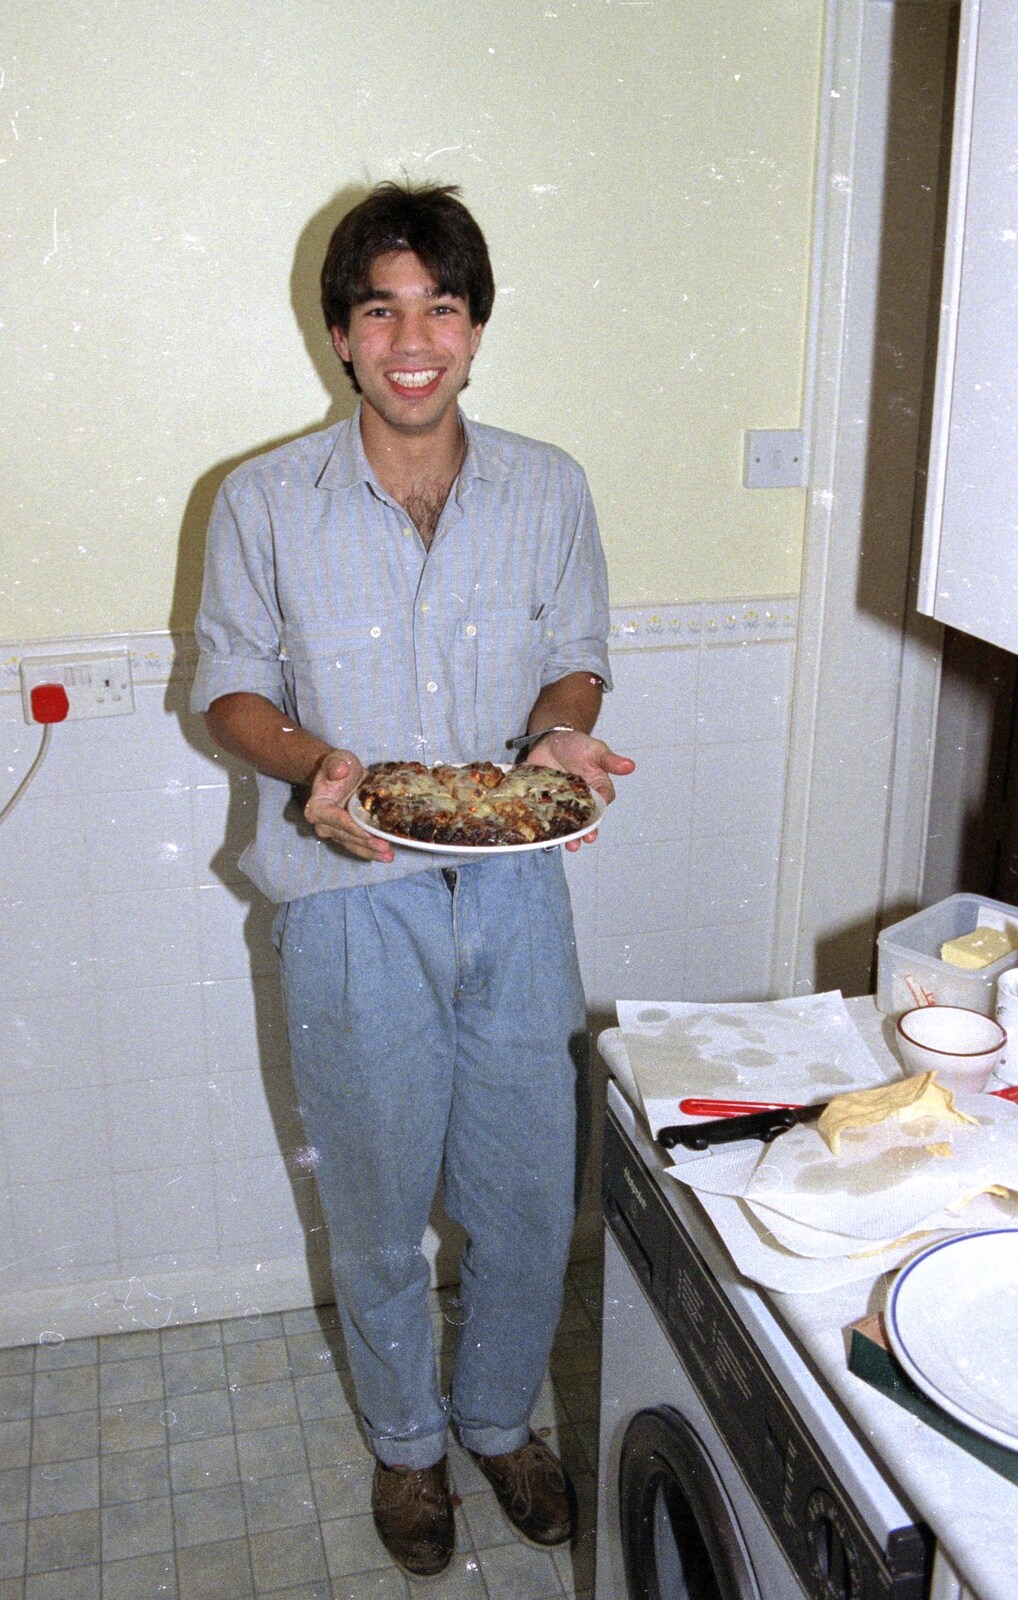 The pizza is well and truly 'brulee' from Nigel's Party and Hyde Park, Lancaster Gate, London - 16th October 1991